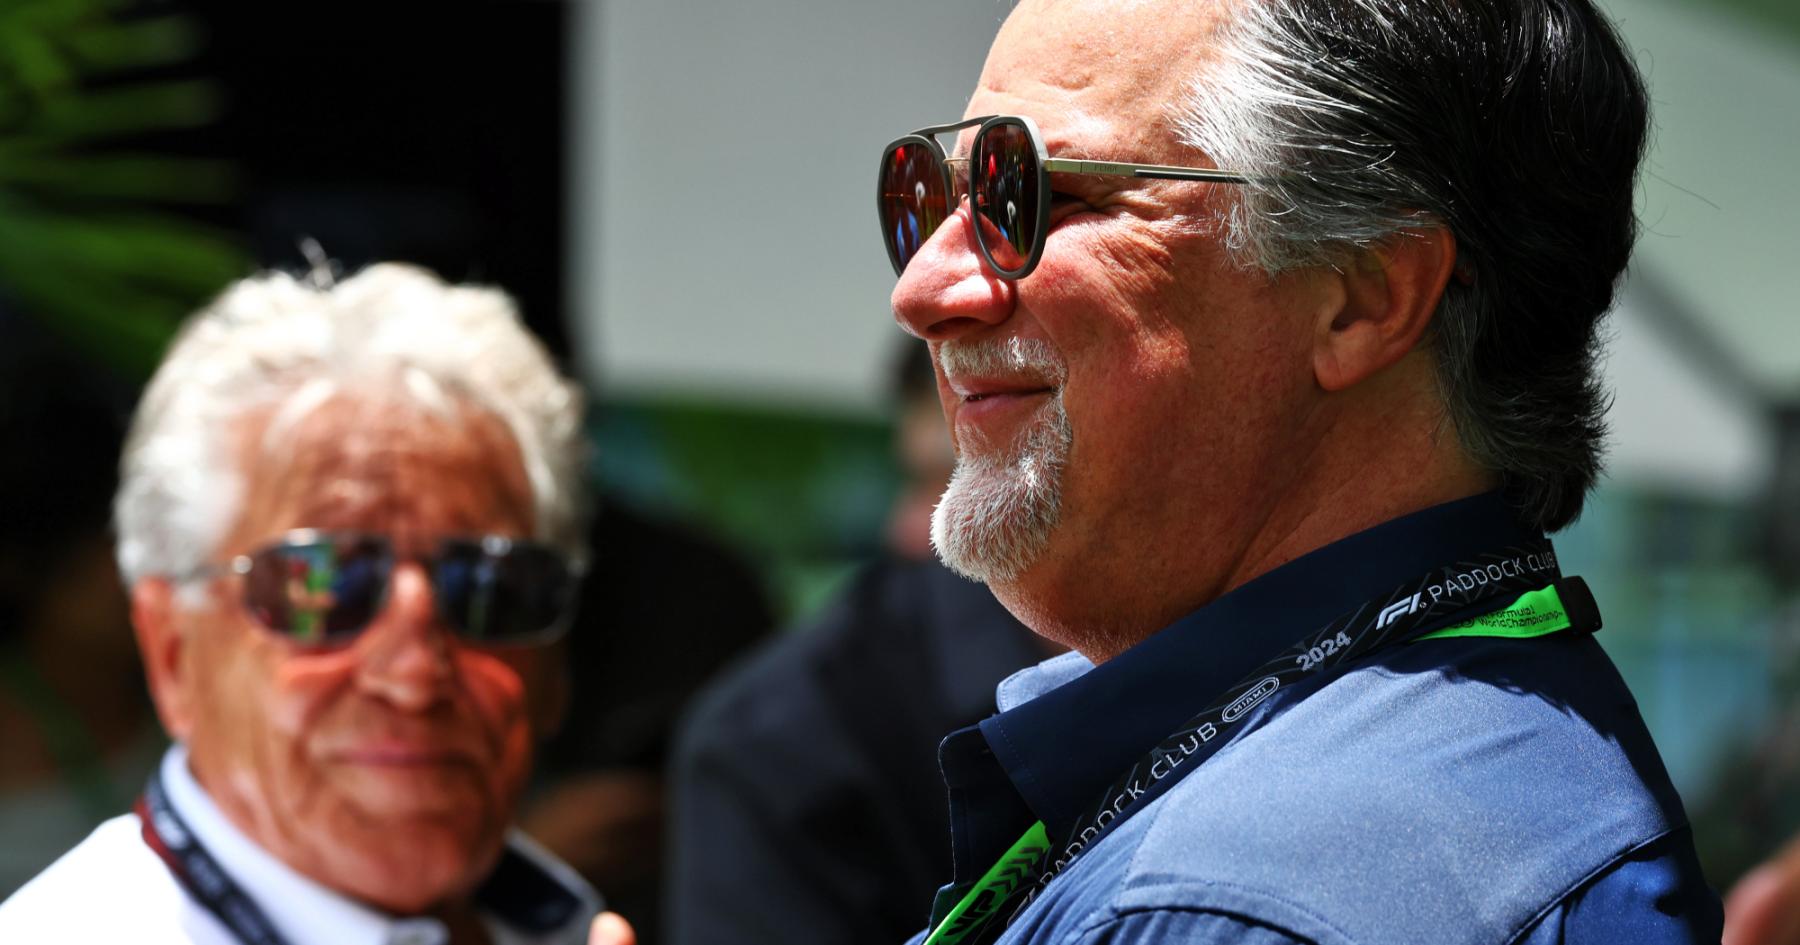 Formula One Faces Allegations of Collusion as Andretti Receives Unprecedented Support